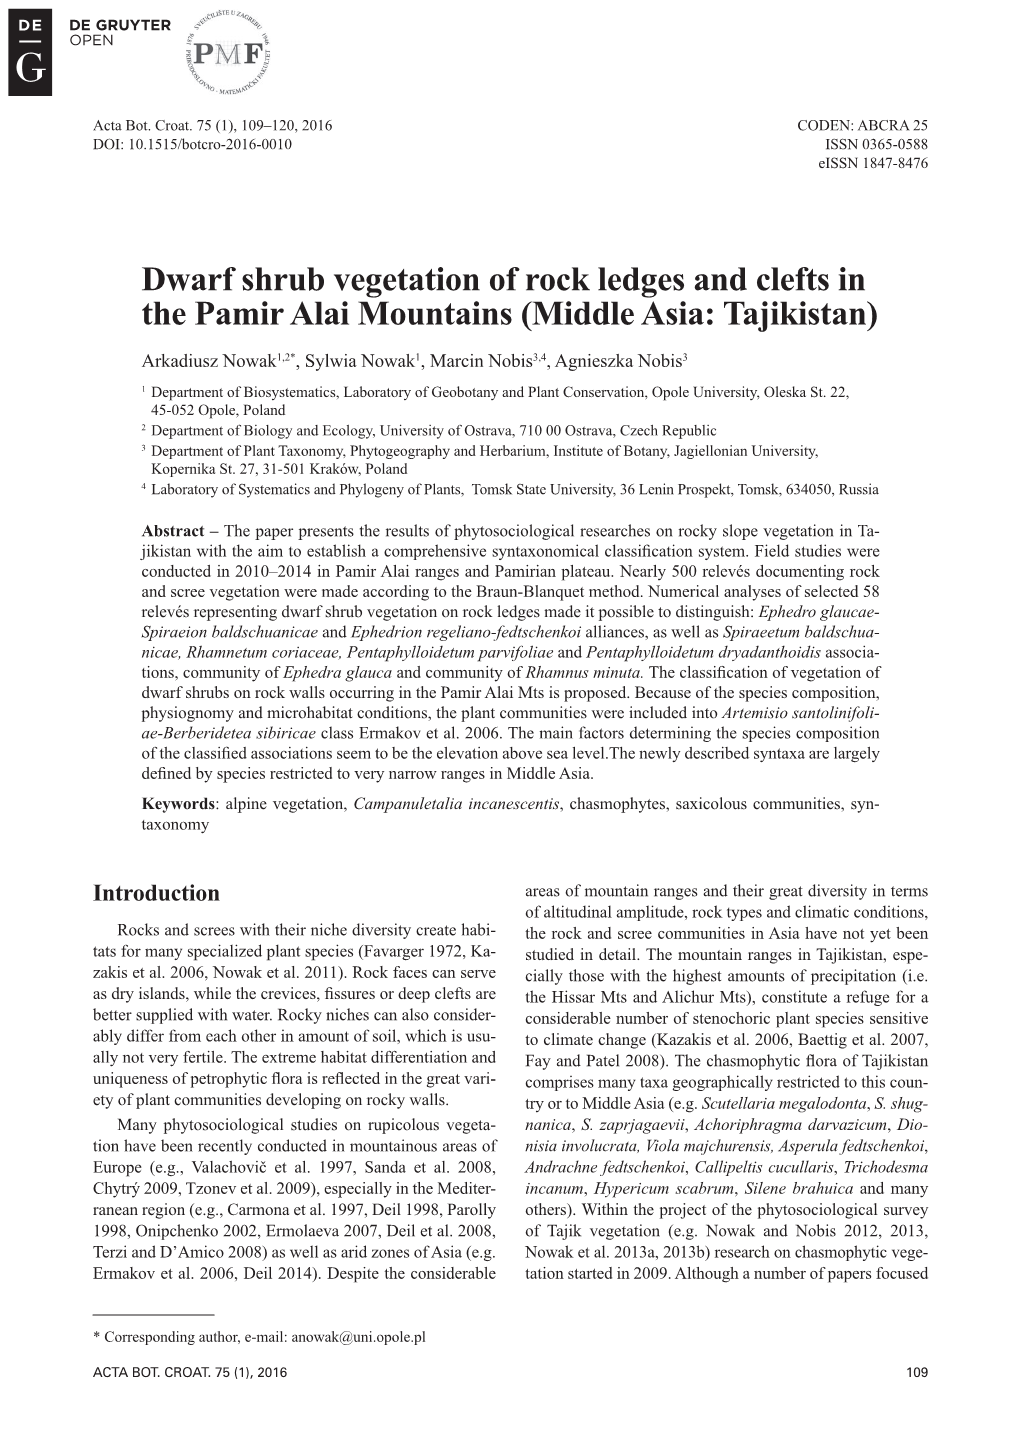 Dwarf Shrub Vegetation of Rock Ledges and Clefts in the Pamir Alai Mountains (Middle Asia: Tajikistan)